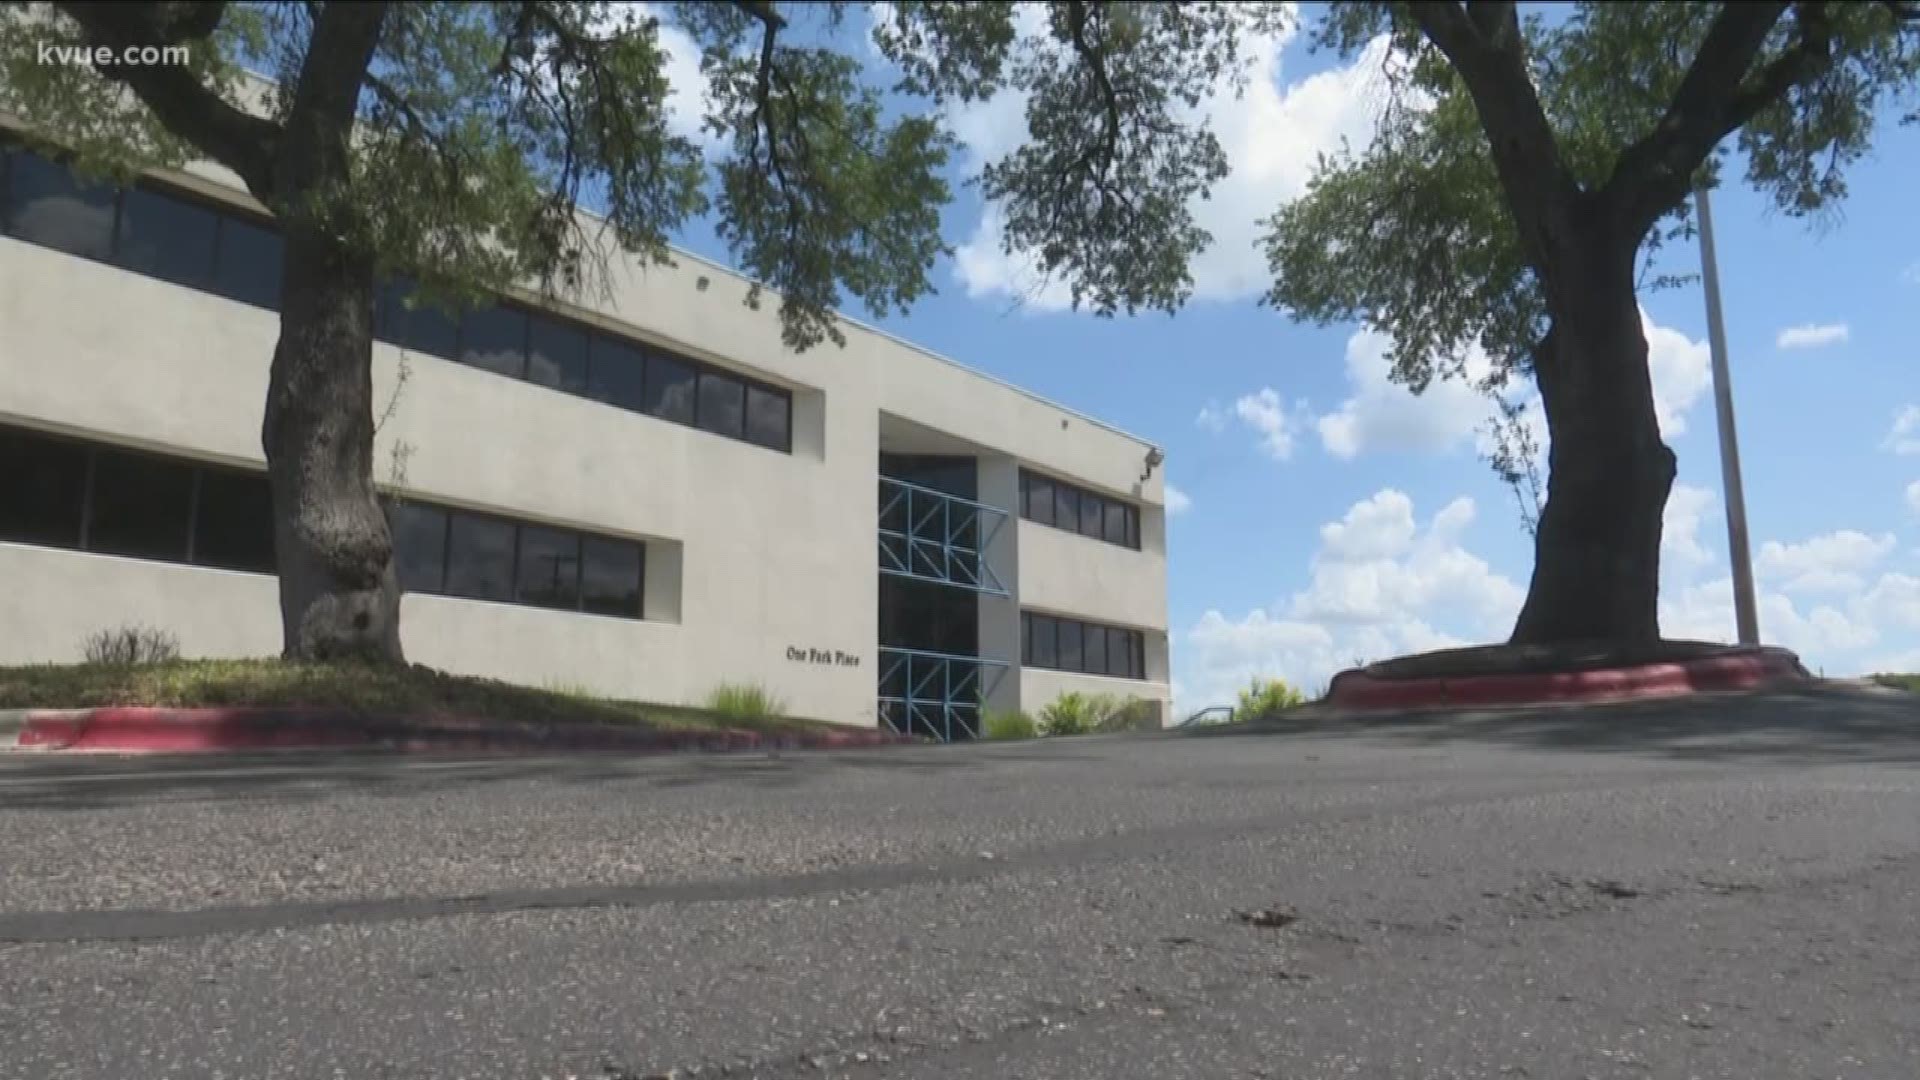 A new lawsuit is targeting the City's plan to turn an office building in South Austin into a homeless shelter.